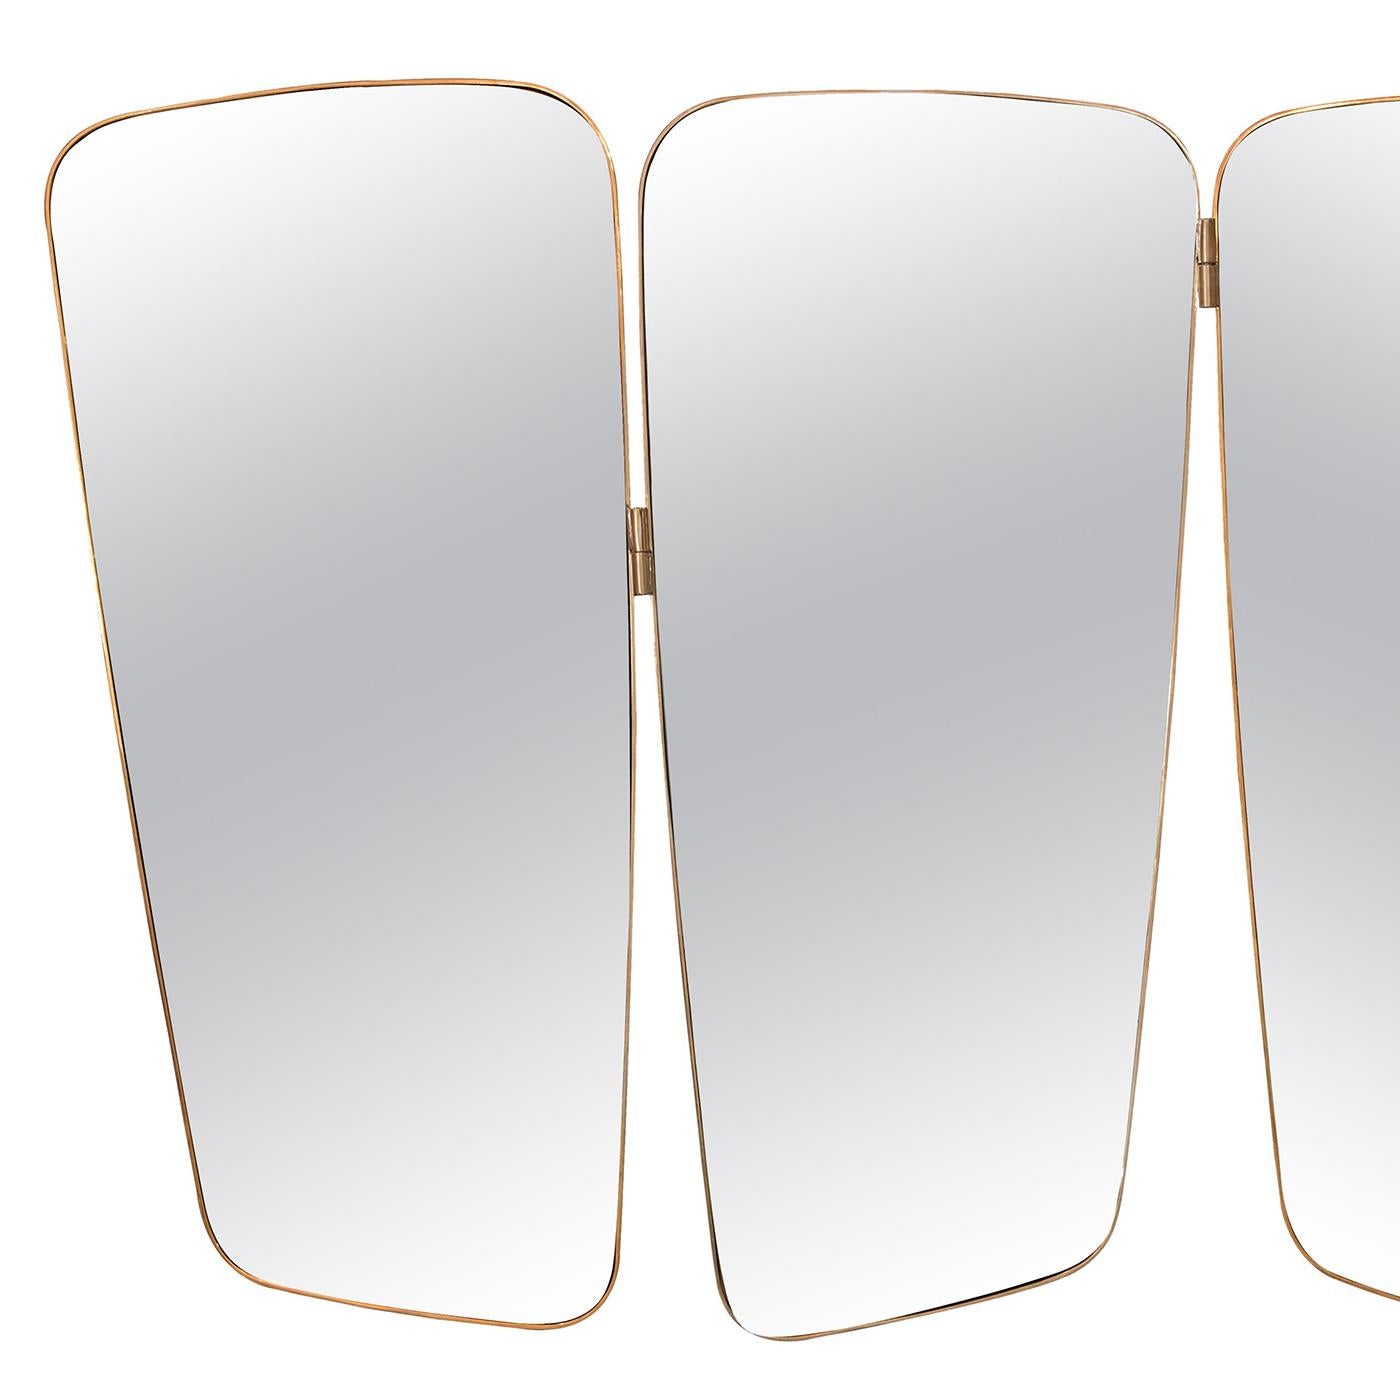 Mirror triple with three glass mirror panels
with solid polished brass frame.